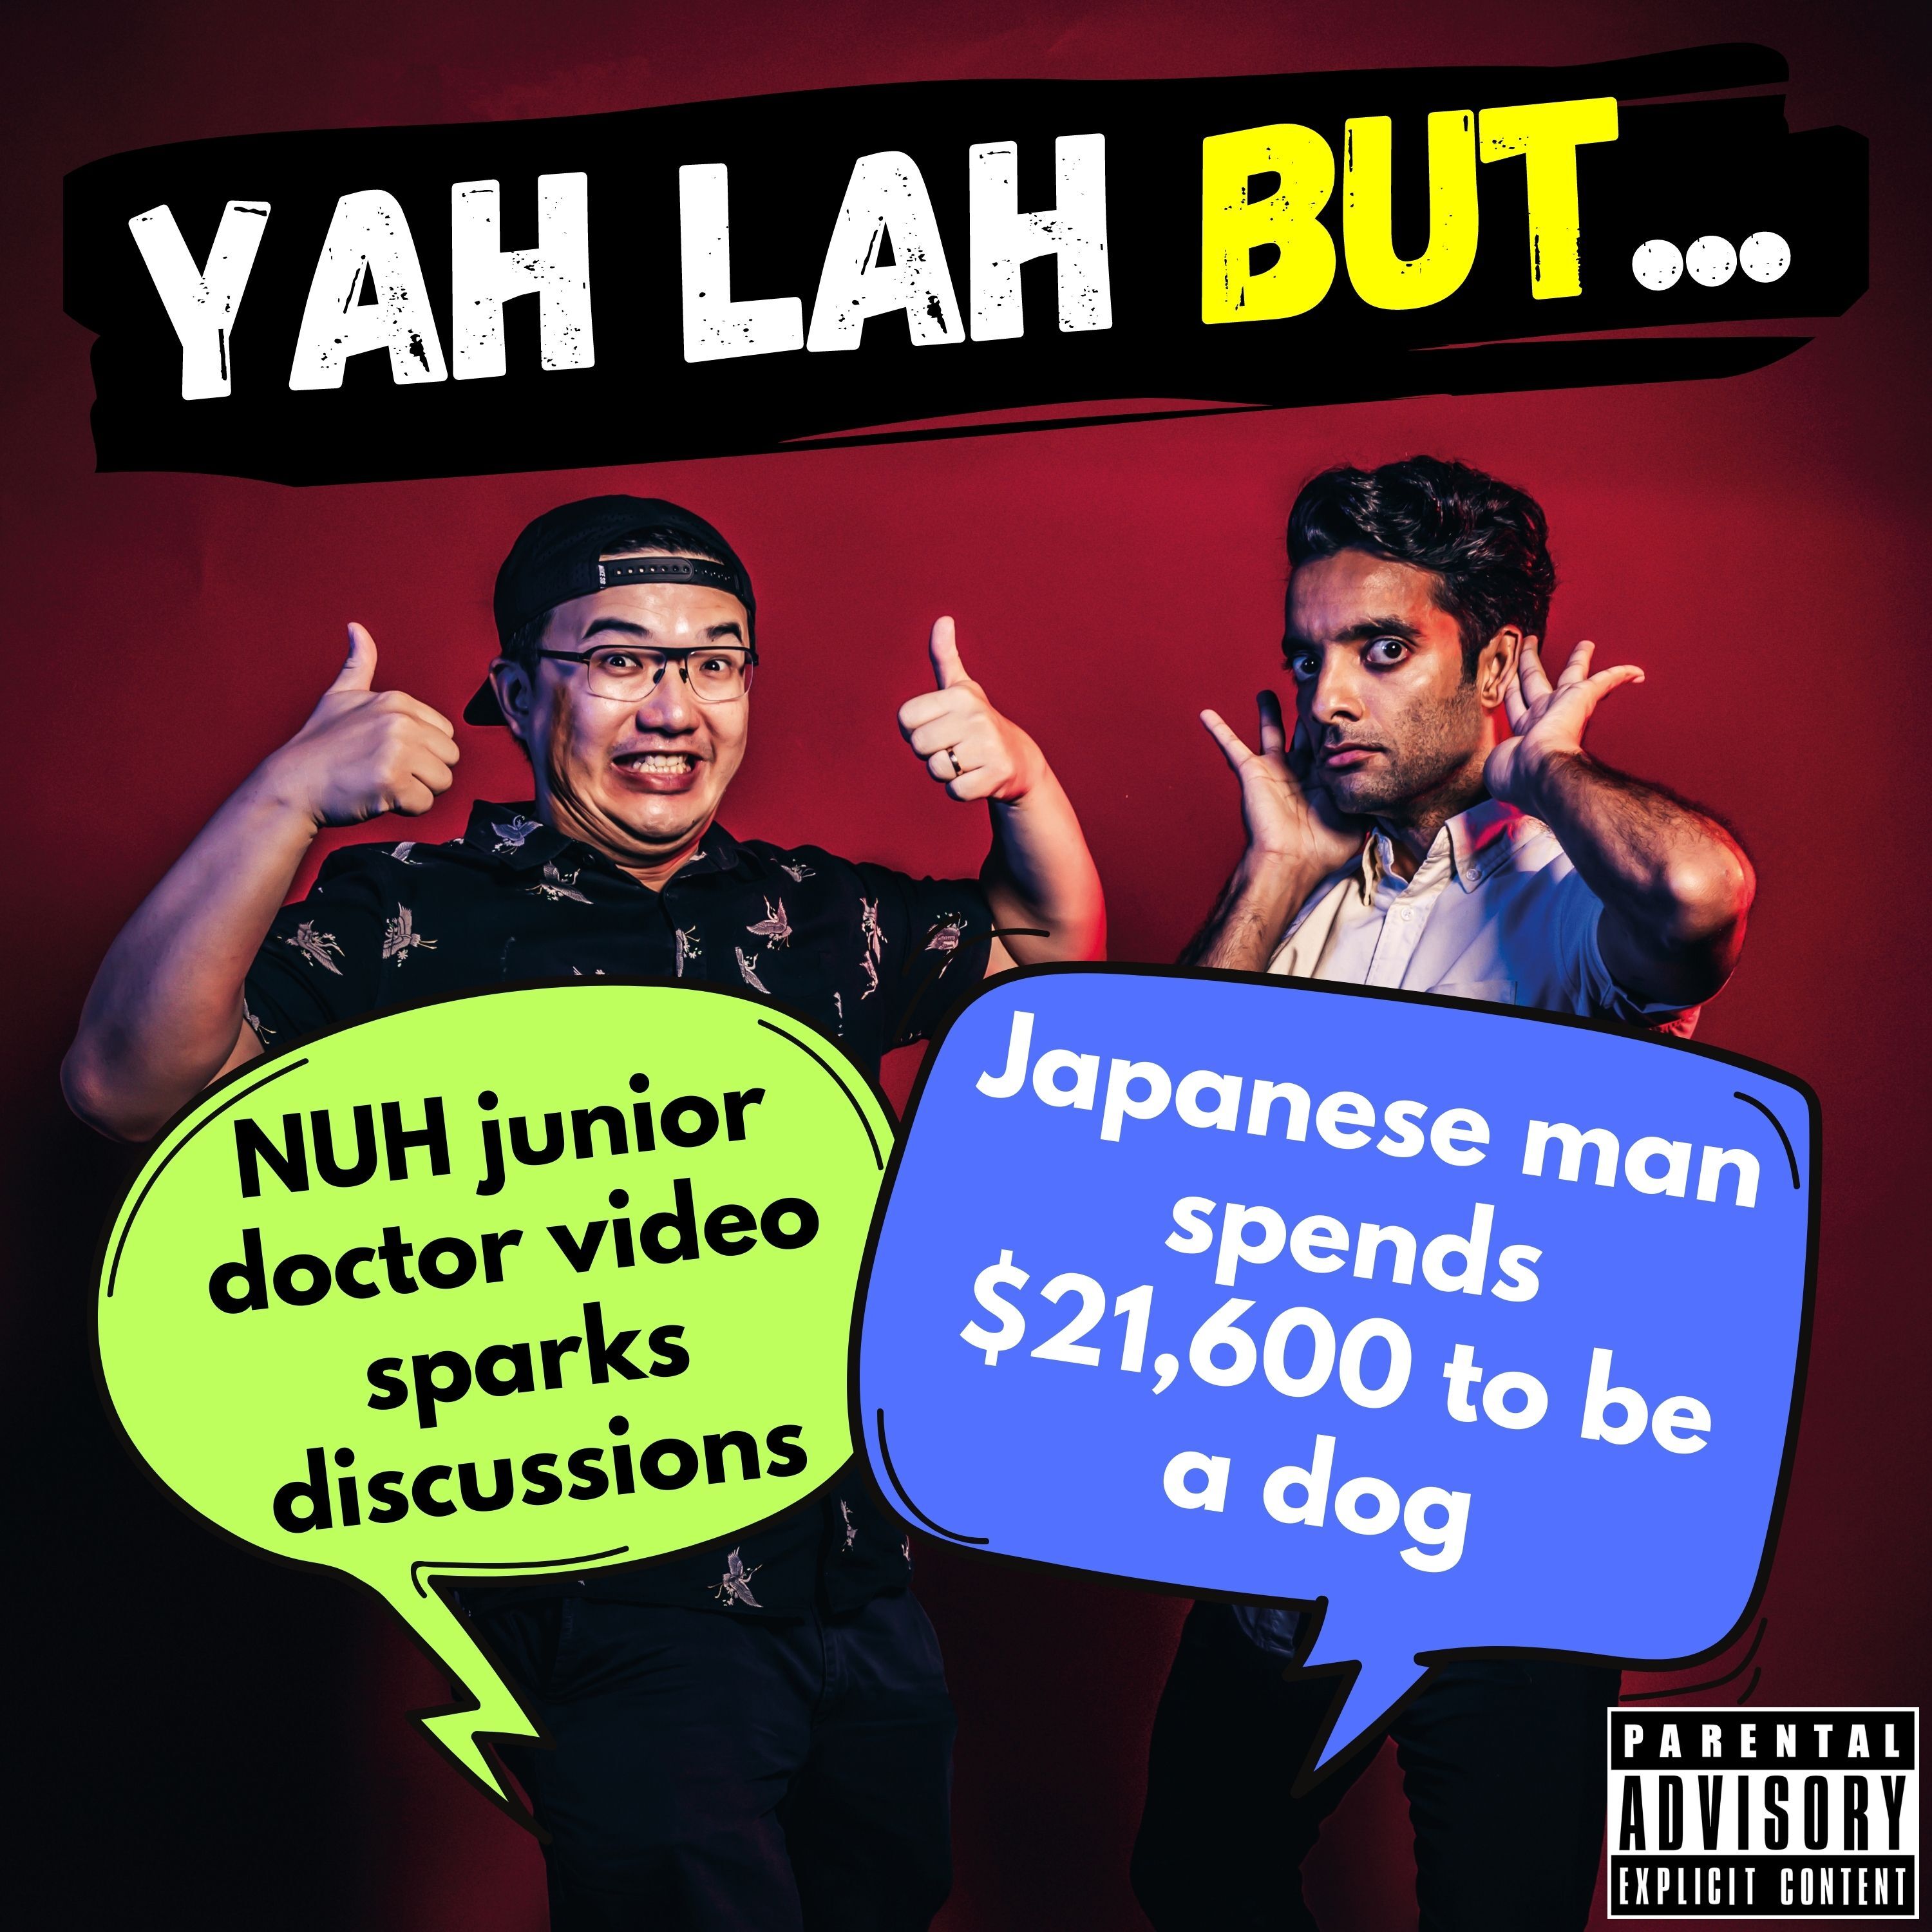 #296 - NUH junior doctor video sparks discussions & Japanese man spends $21,600 to be a dog